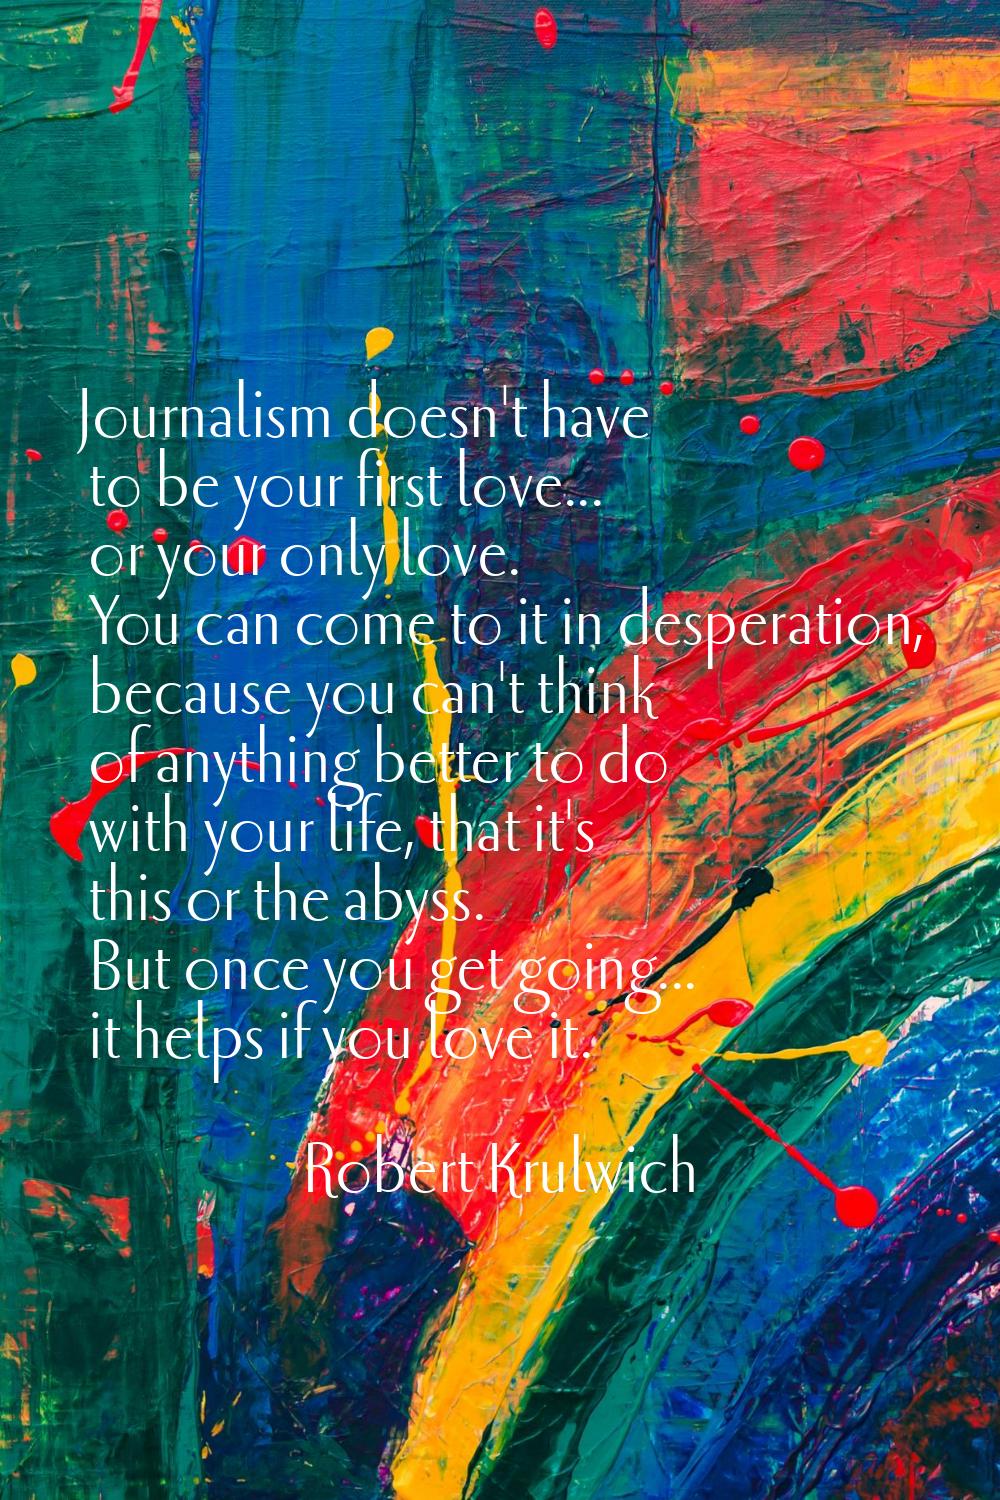 Journalism doesn't have to be your first love... or your only love. You can come to it in desperati